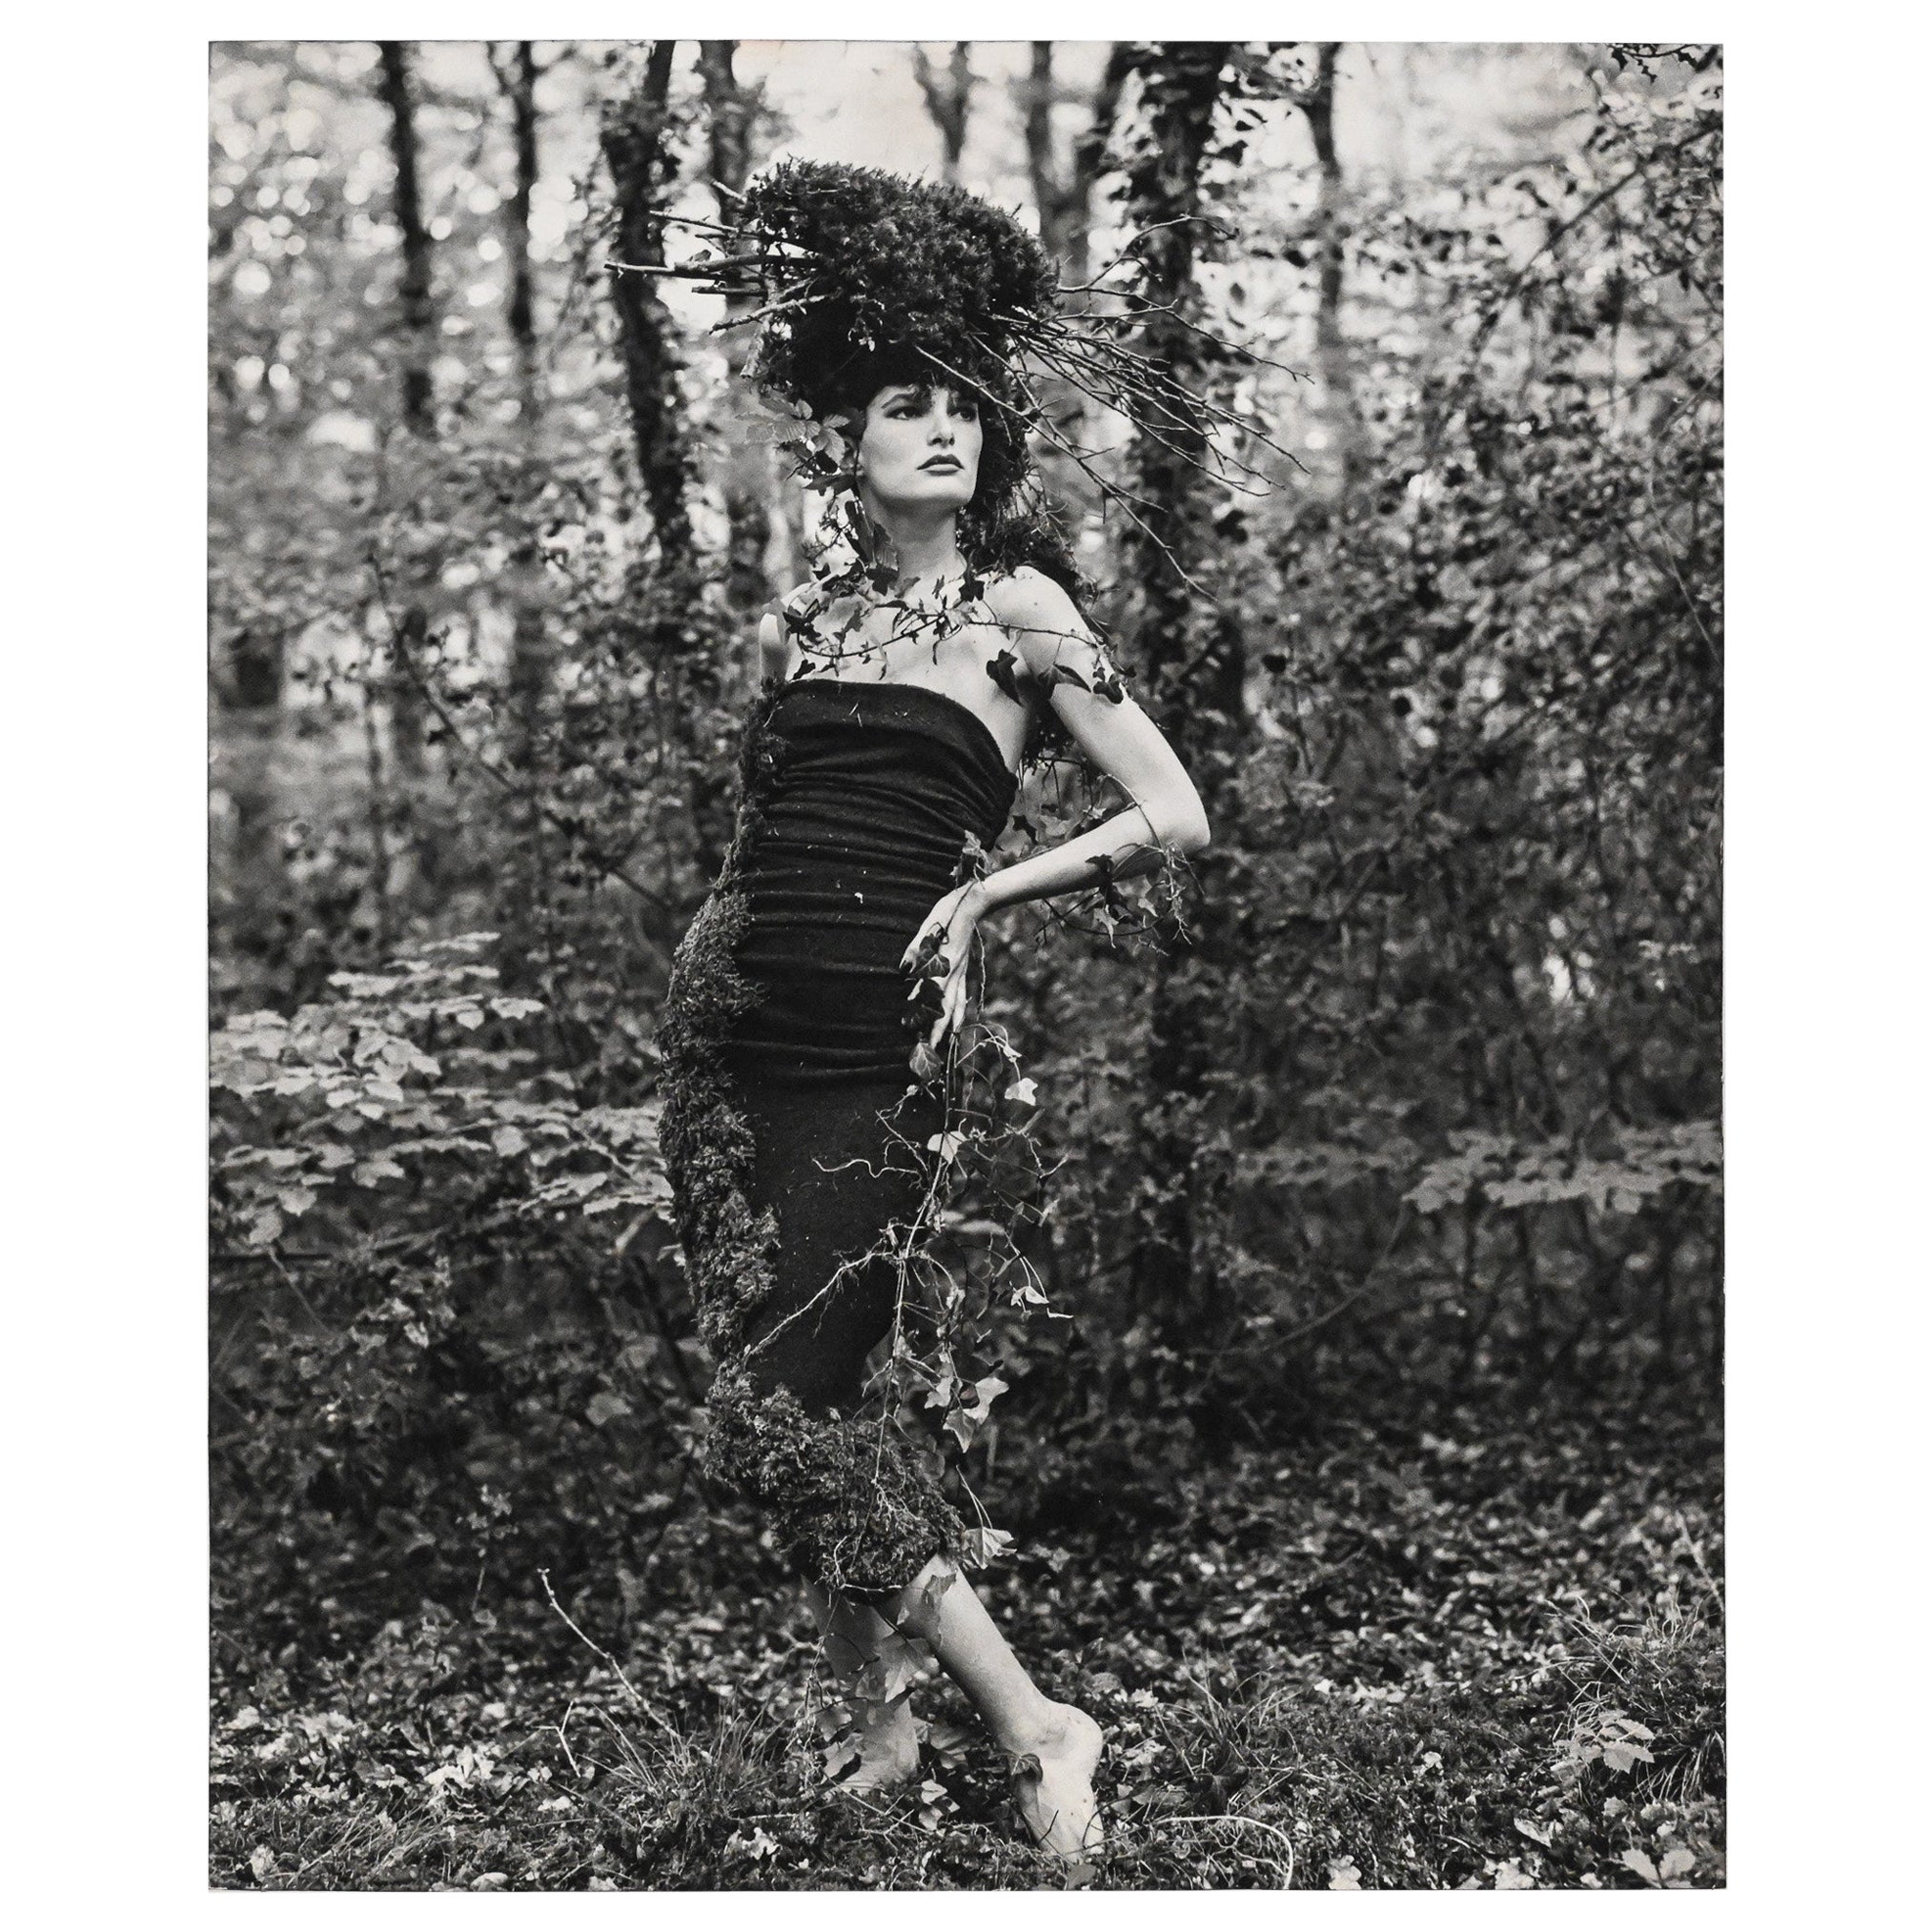 Original Photograph of Model in the Woods by Bruce Weber for Karl Lagerfeld 2